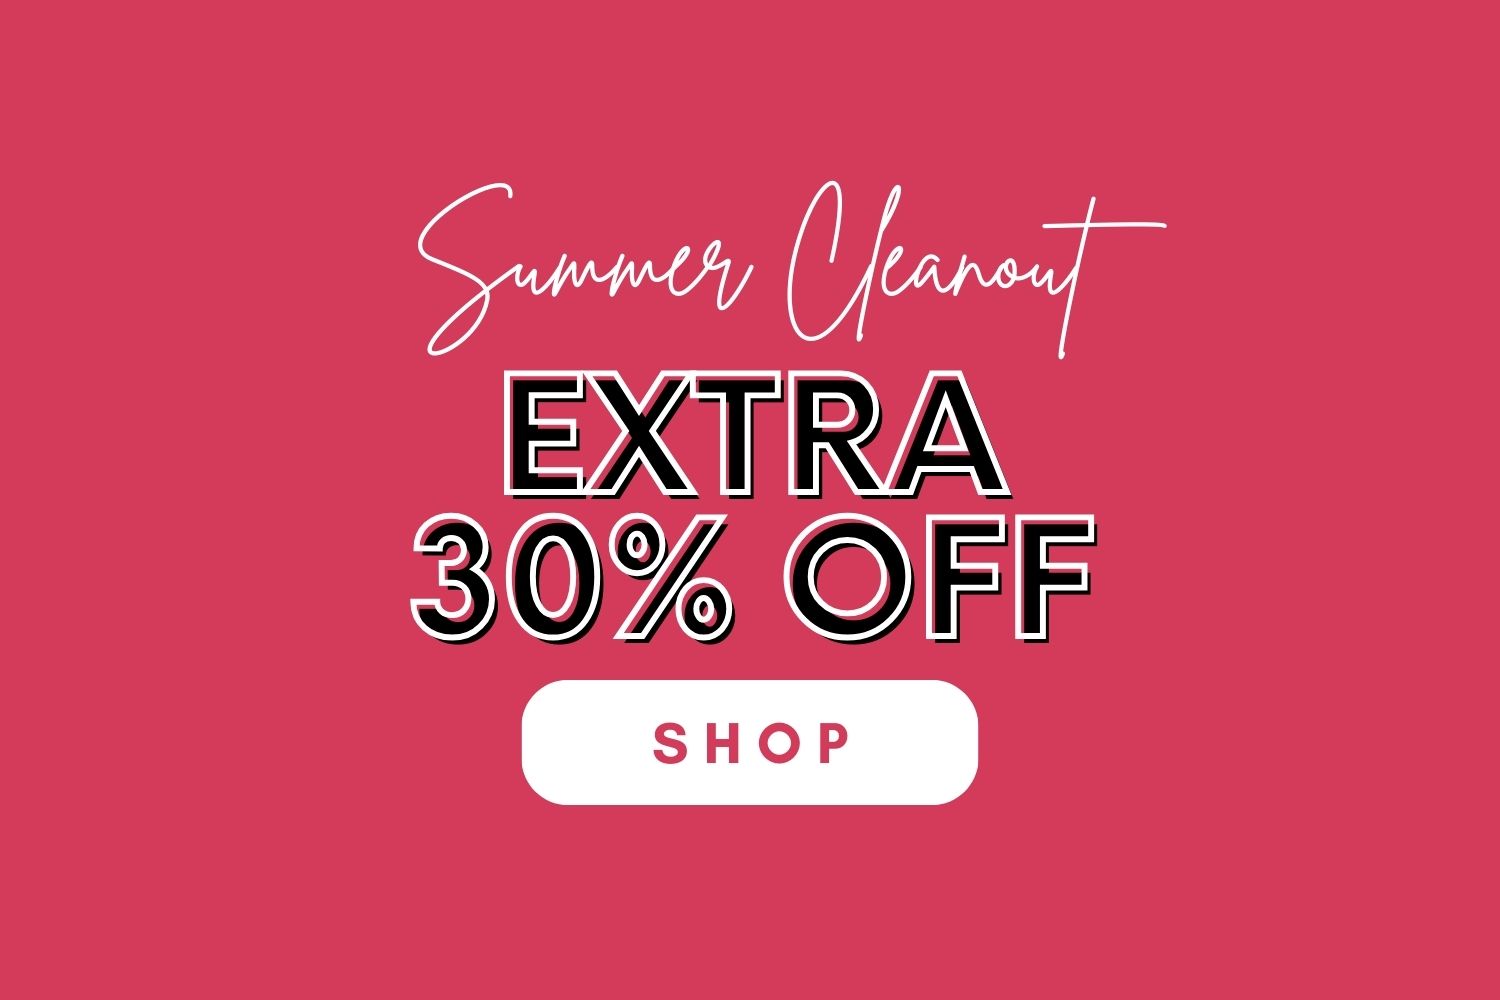 Summer Cleanout Extra 30% Off SHOP